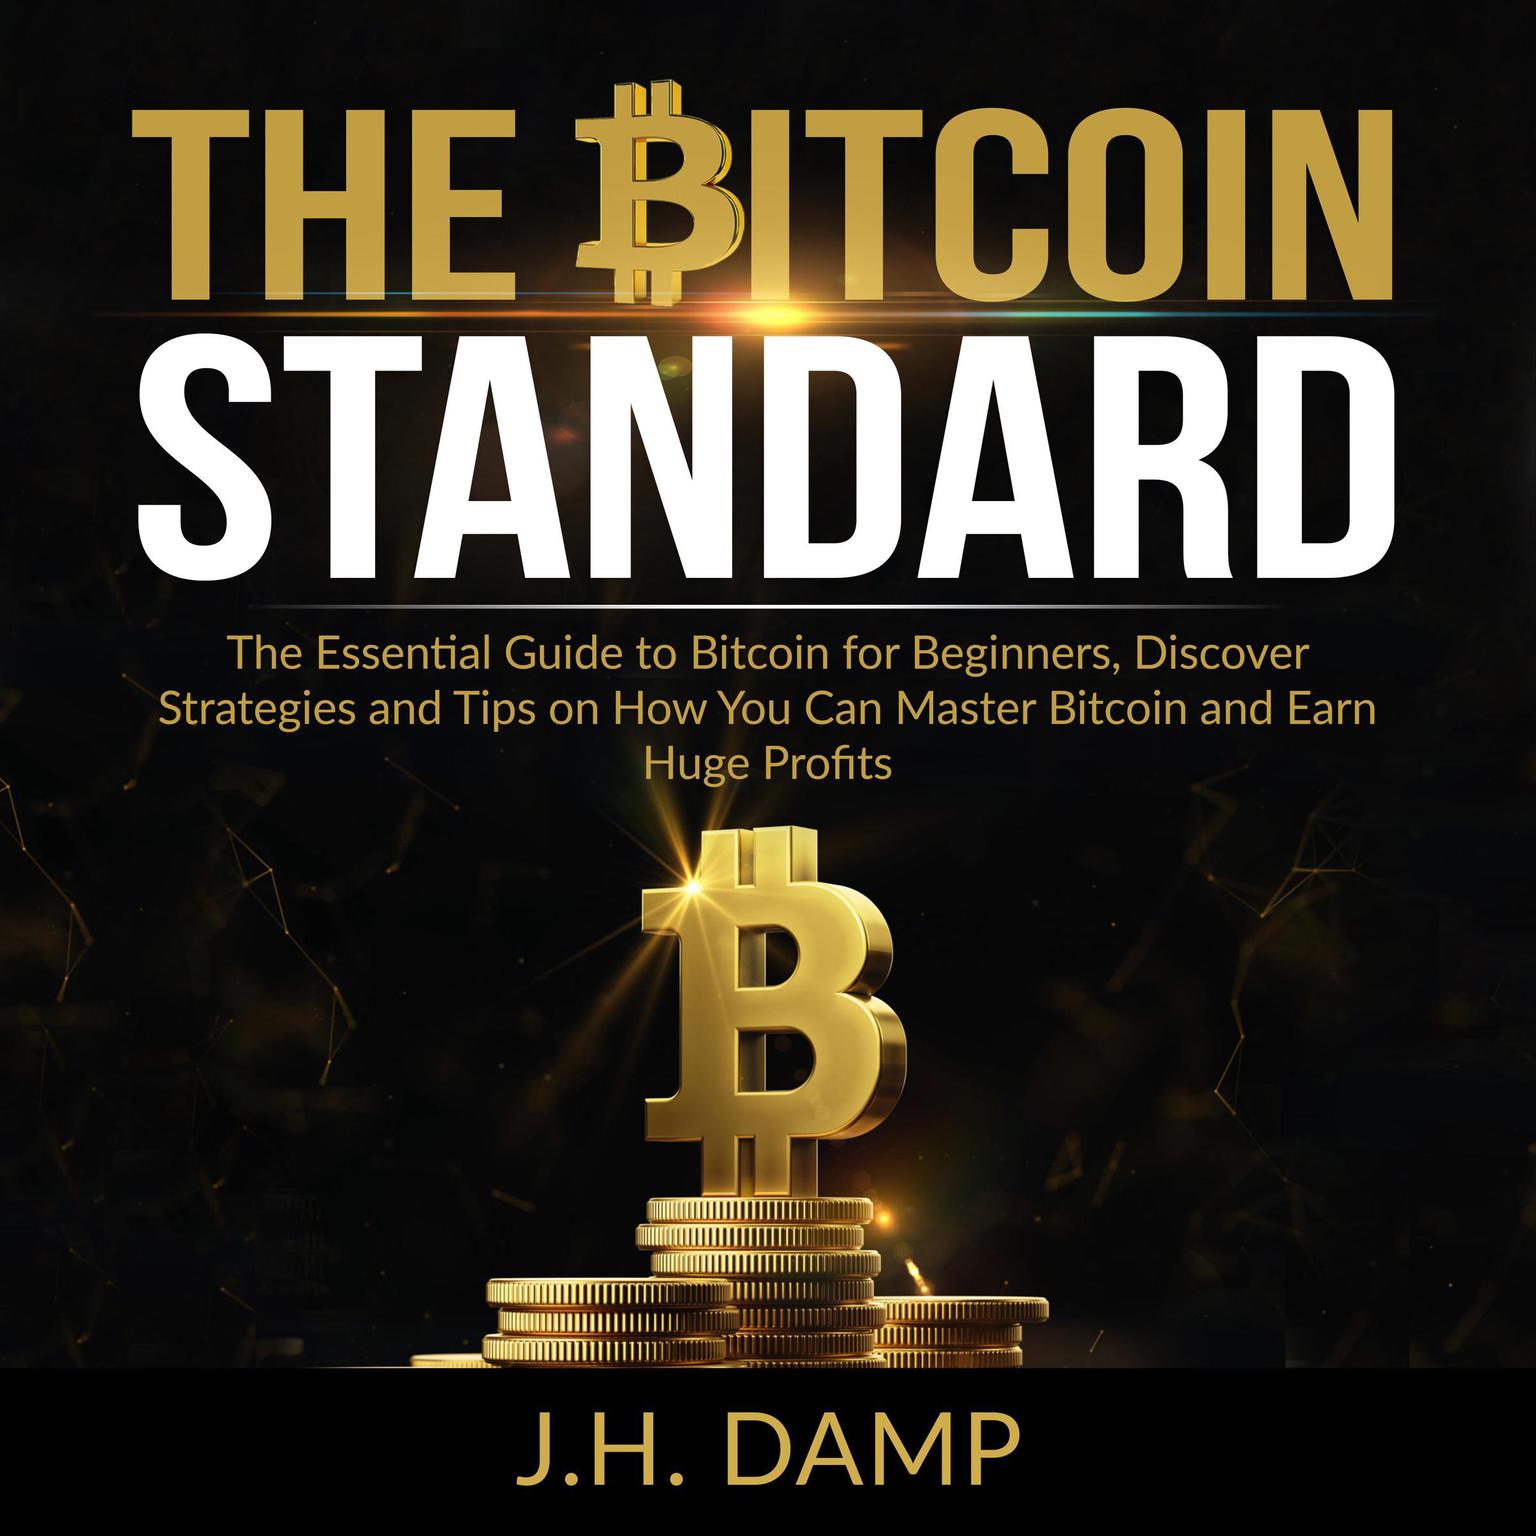 The Bitcoin Standard: The Essential Guide to Bitcoin for Beginners, Discover How Strategies and Tips on How You Can Master Bitcoin and Earn Huge Profits Audiobook, by J.H. Damp